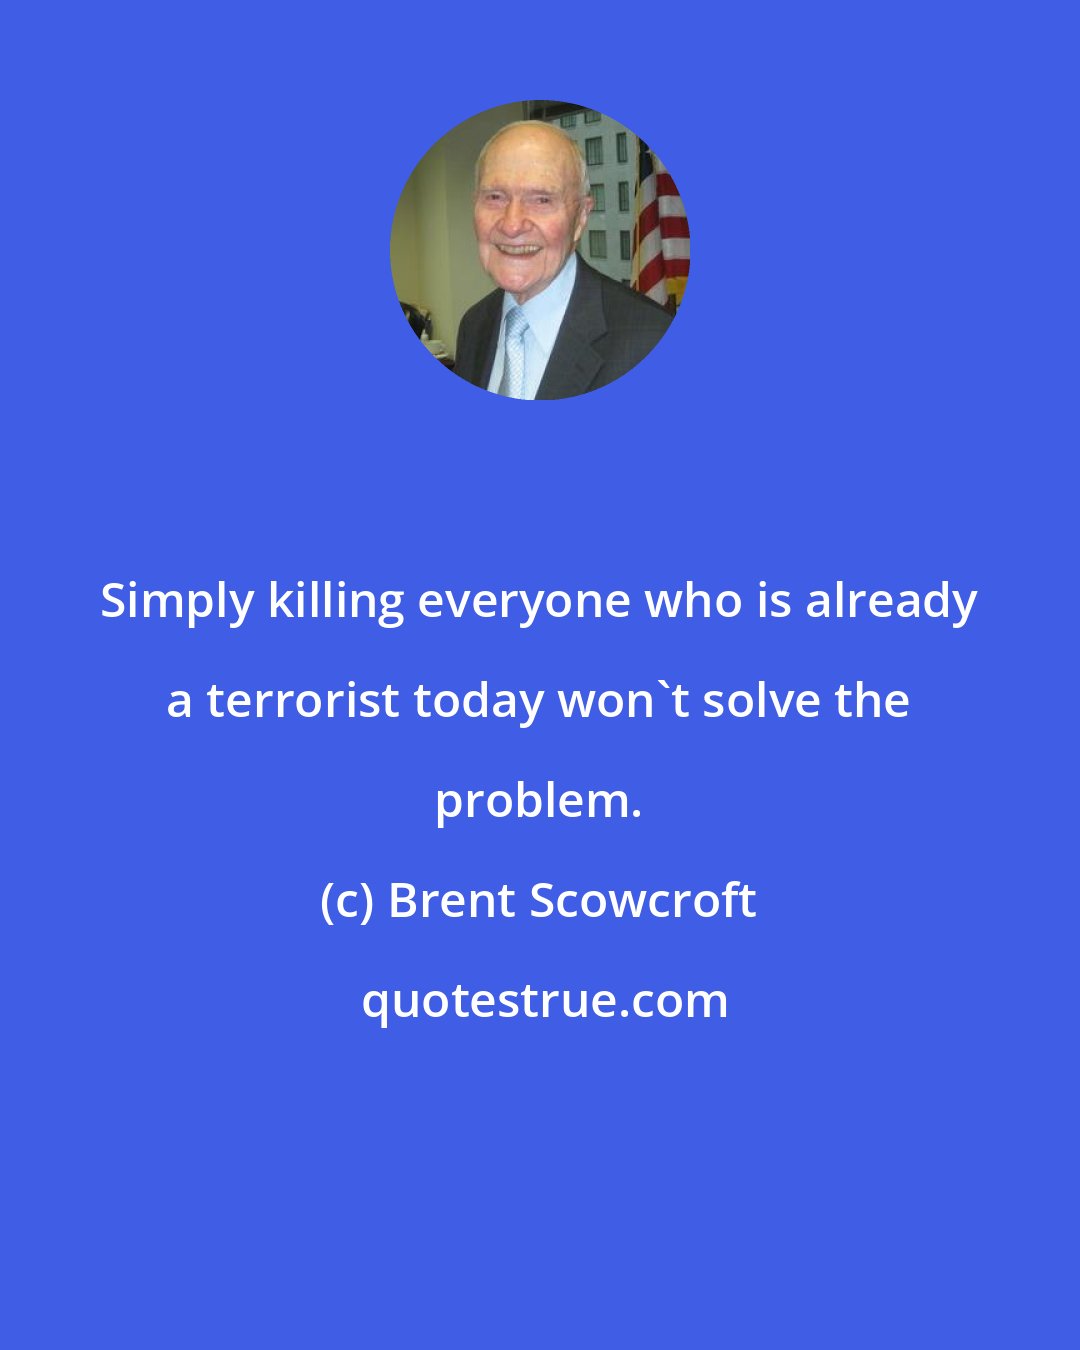 Brent Scowcroft: Simply killing everyone who is already a terrorist today won't solve the problem.